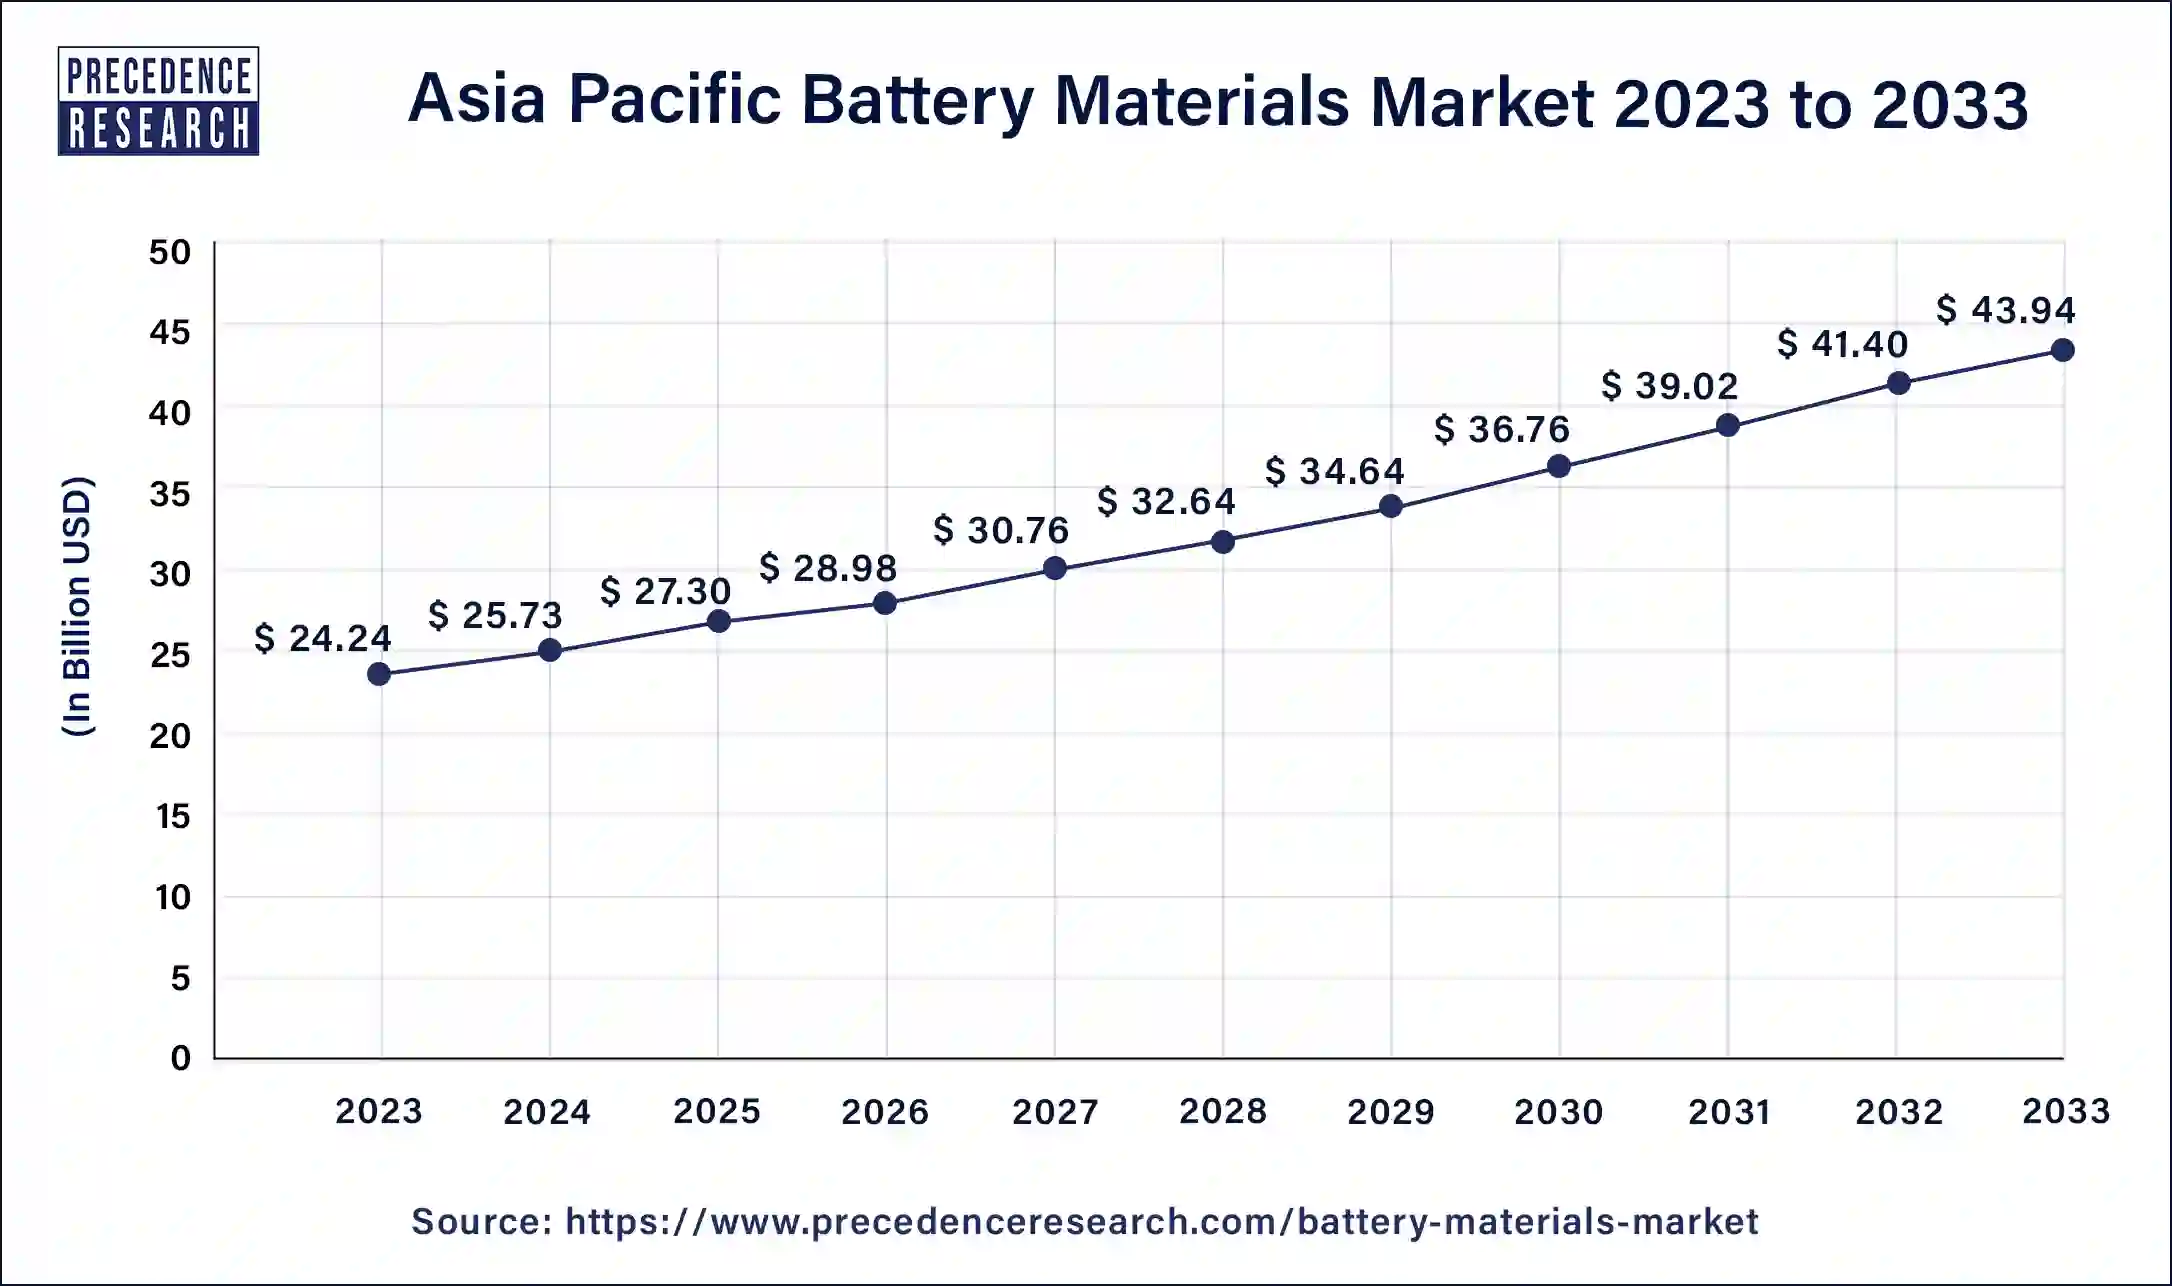 Asia Pacific Battery Materials Market Size 2024 to 2033